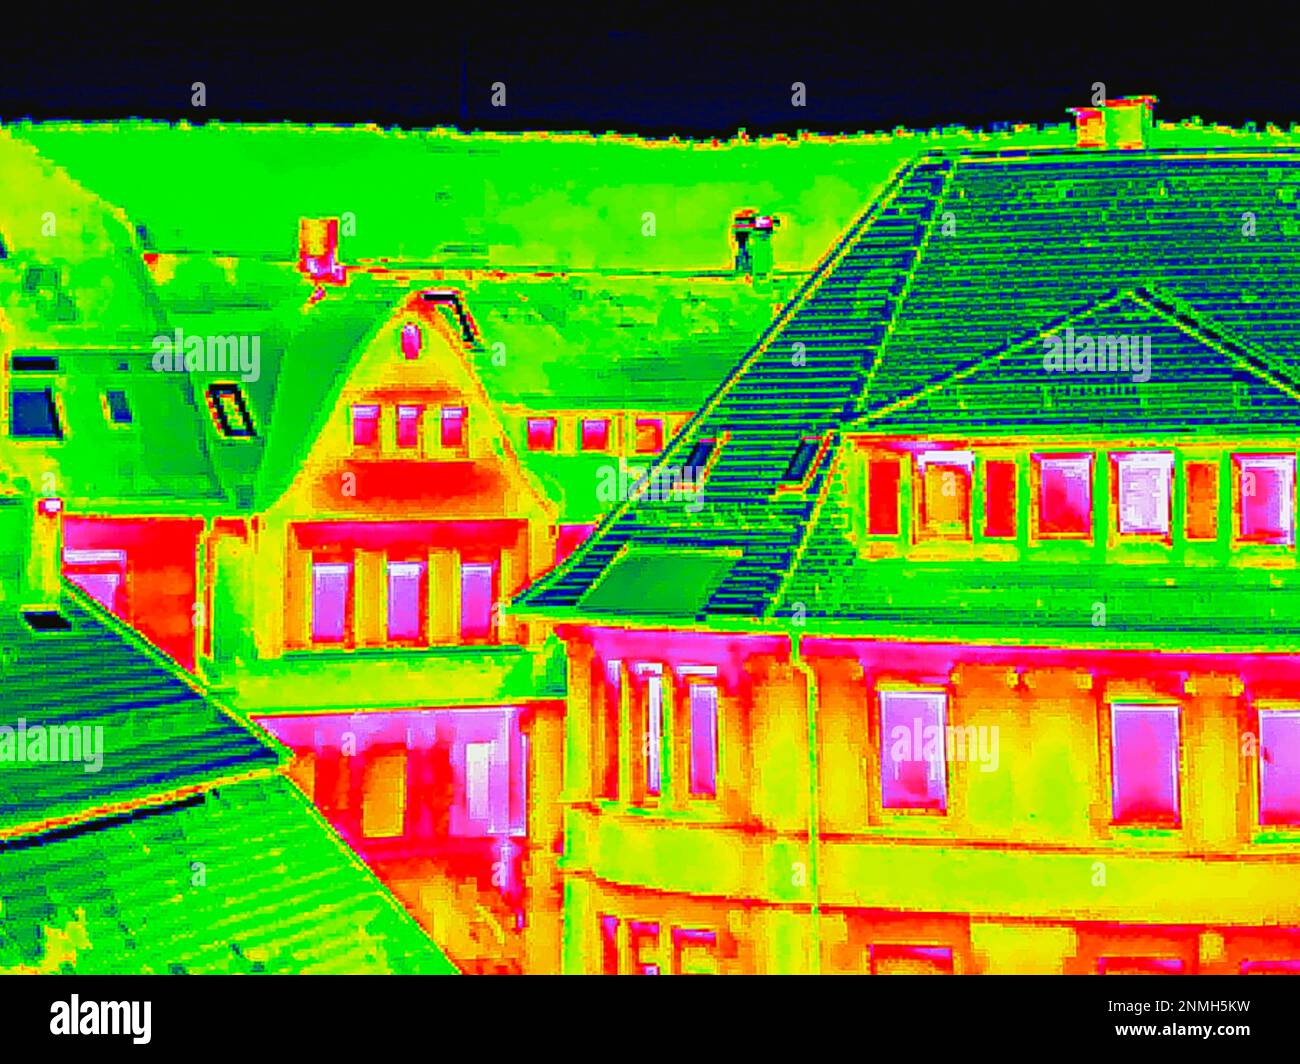 https://c8.alamy.com/comp/2NMH5KW/thermal-image-or-thermography-shows-weak-points-in-the-insulation-of-residential-buildings-symbol-photo-energy-crisis-interpolated-stuttgart-2NMH5KW.jpg